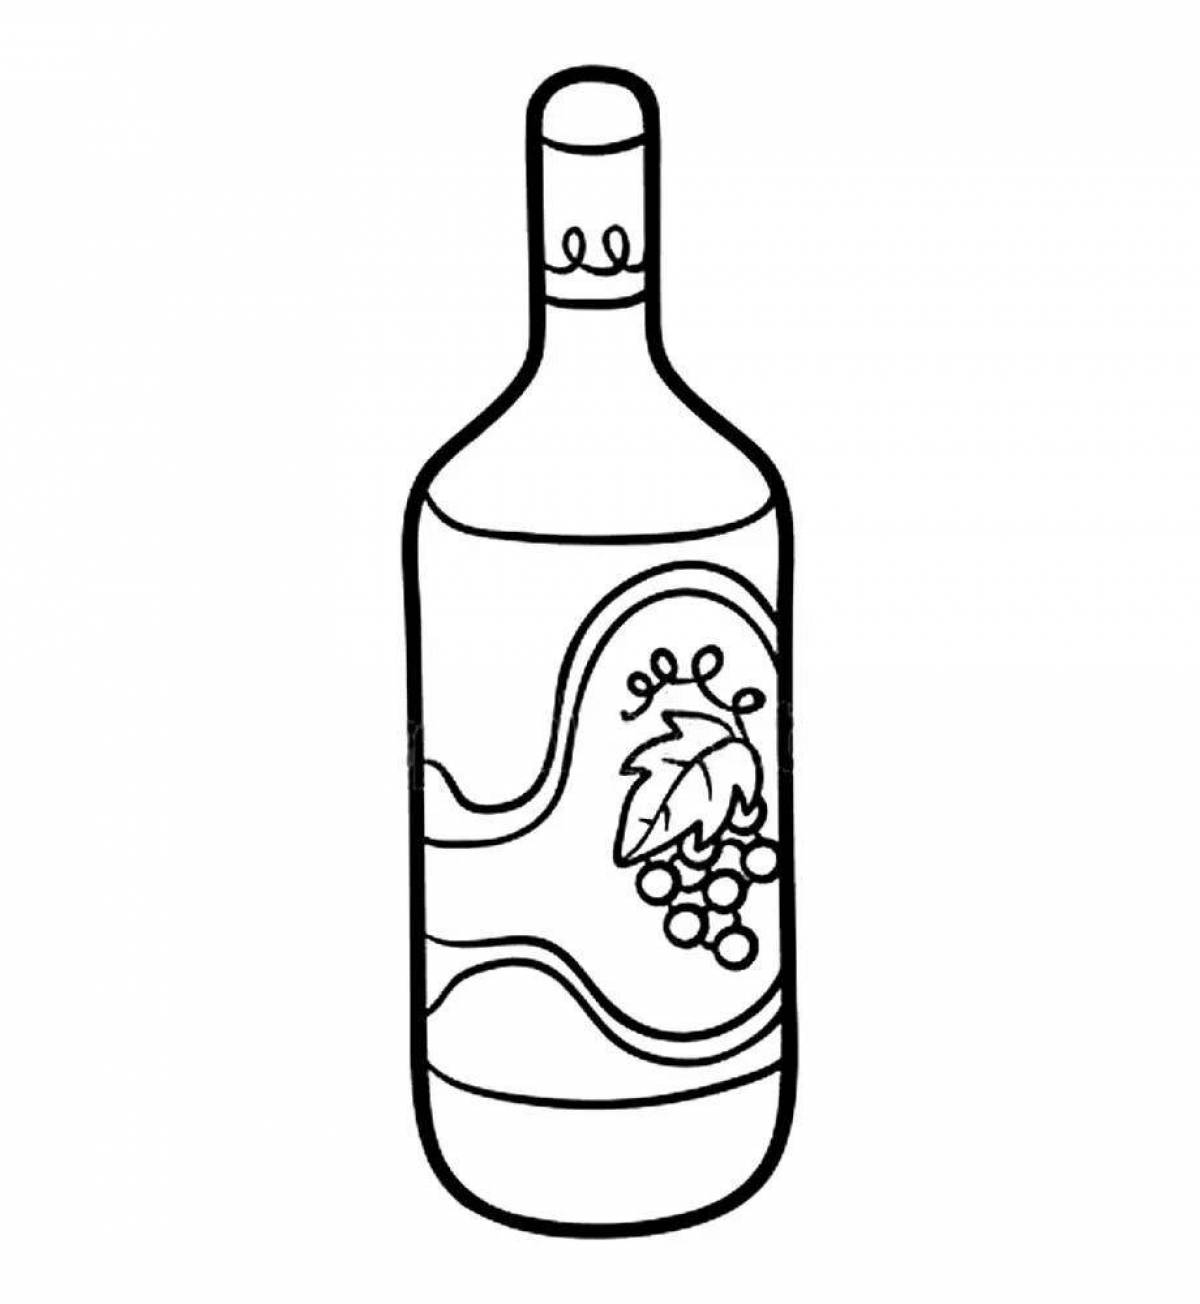 Coloring book big bottle of wine